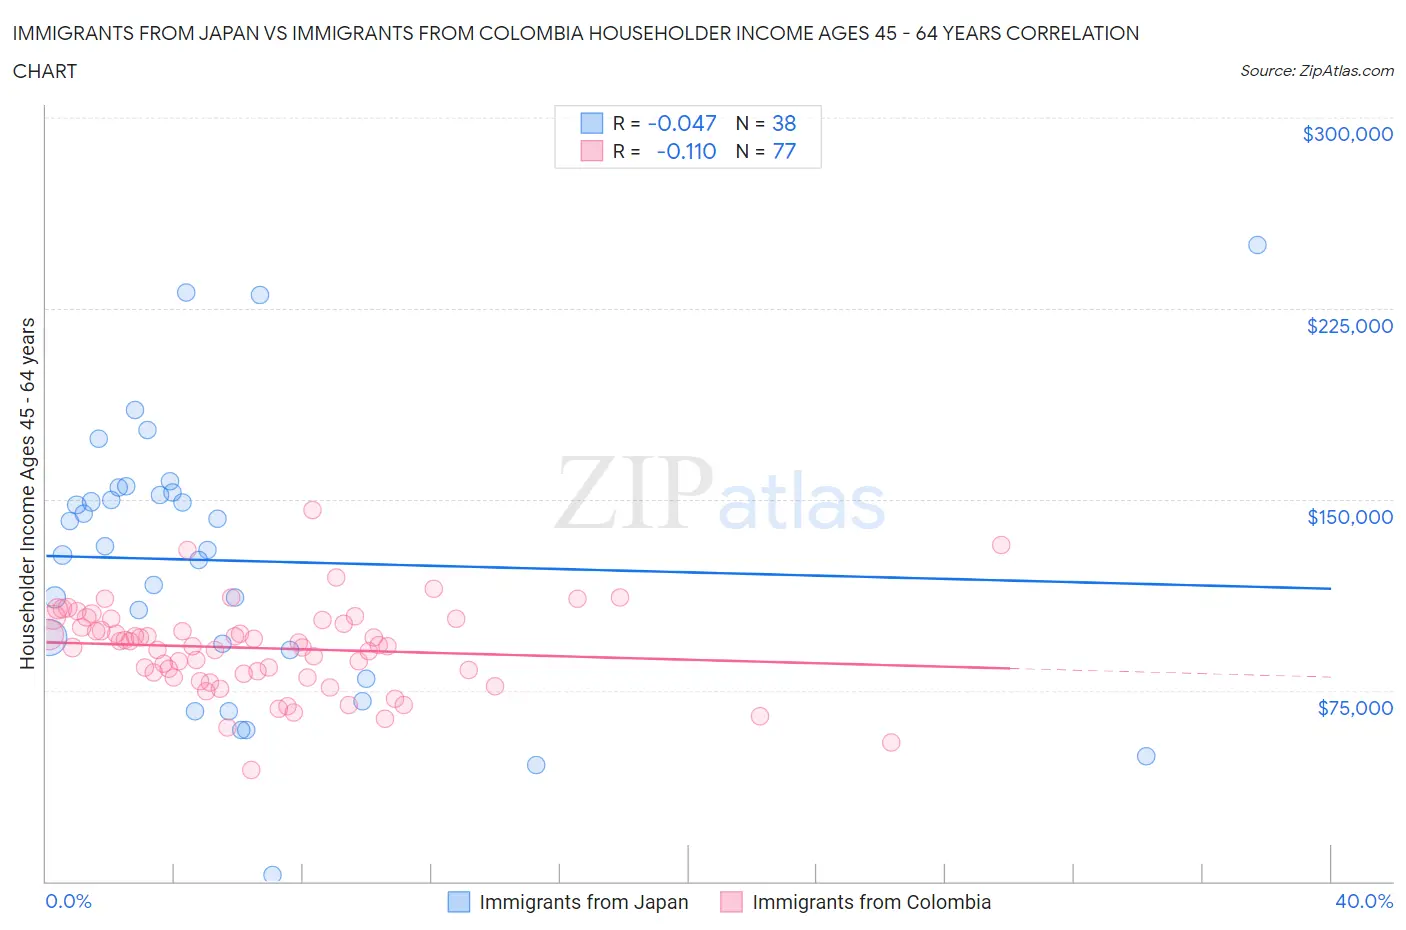 Immigrants from Japan vs Immigrants from Colombia Householder Income Ages 45 - 64 years